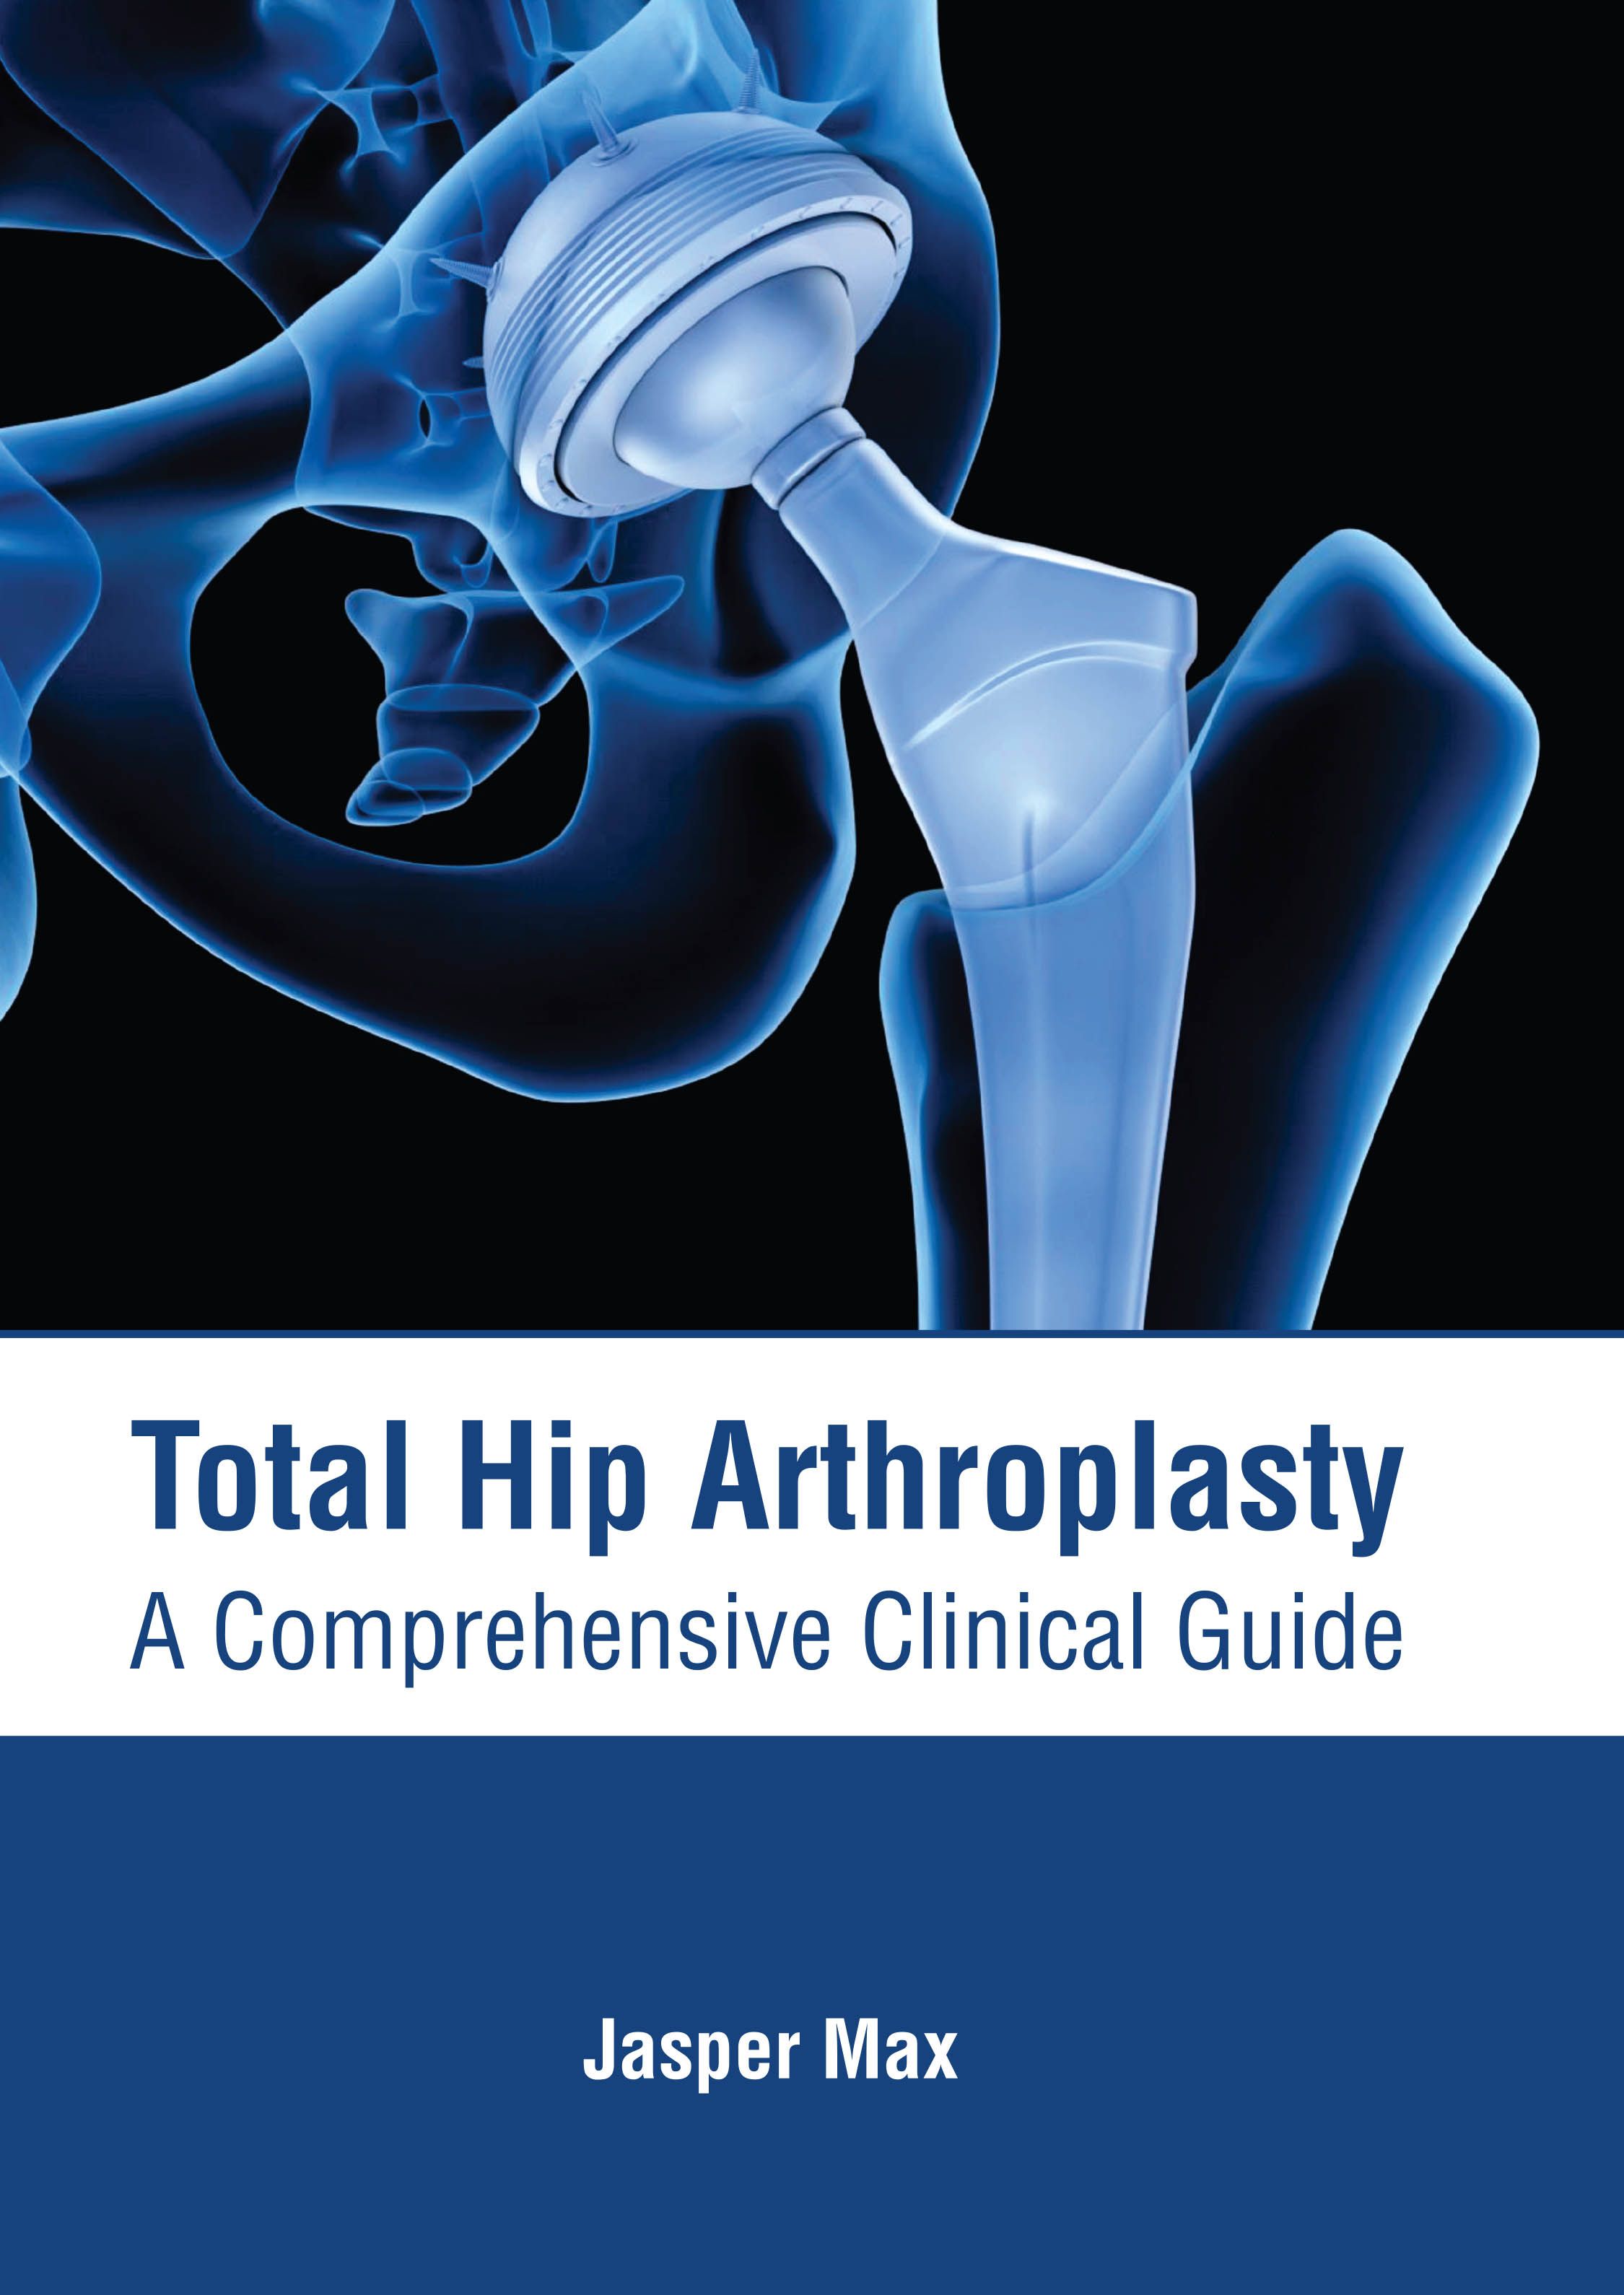 exclusive-publishers/american-medical-publishers/total-hip-arthroplasty-a-comprehensive-clinical-guide-9781639274048